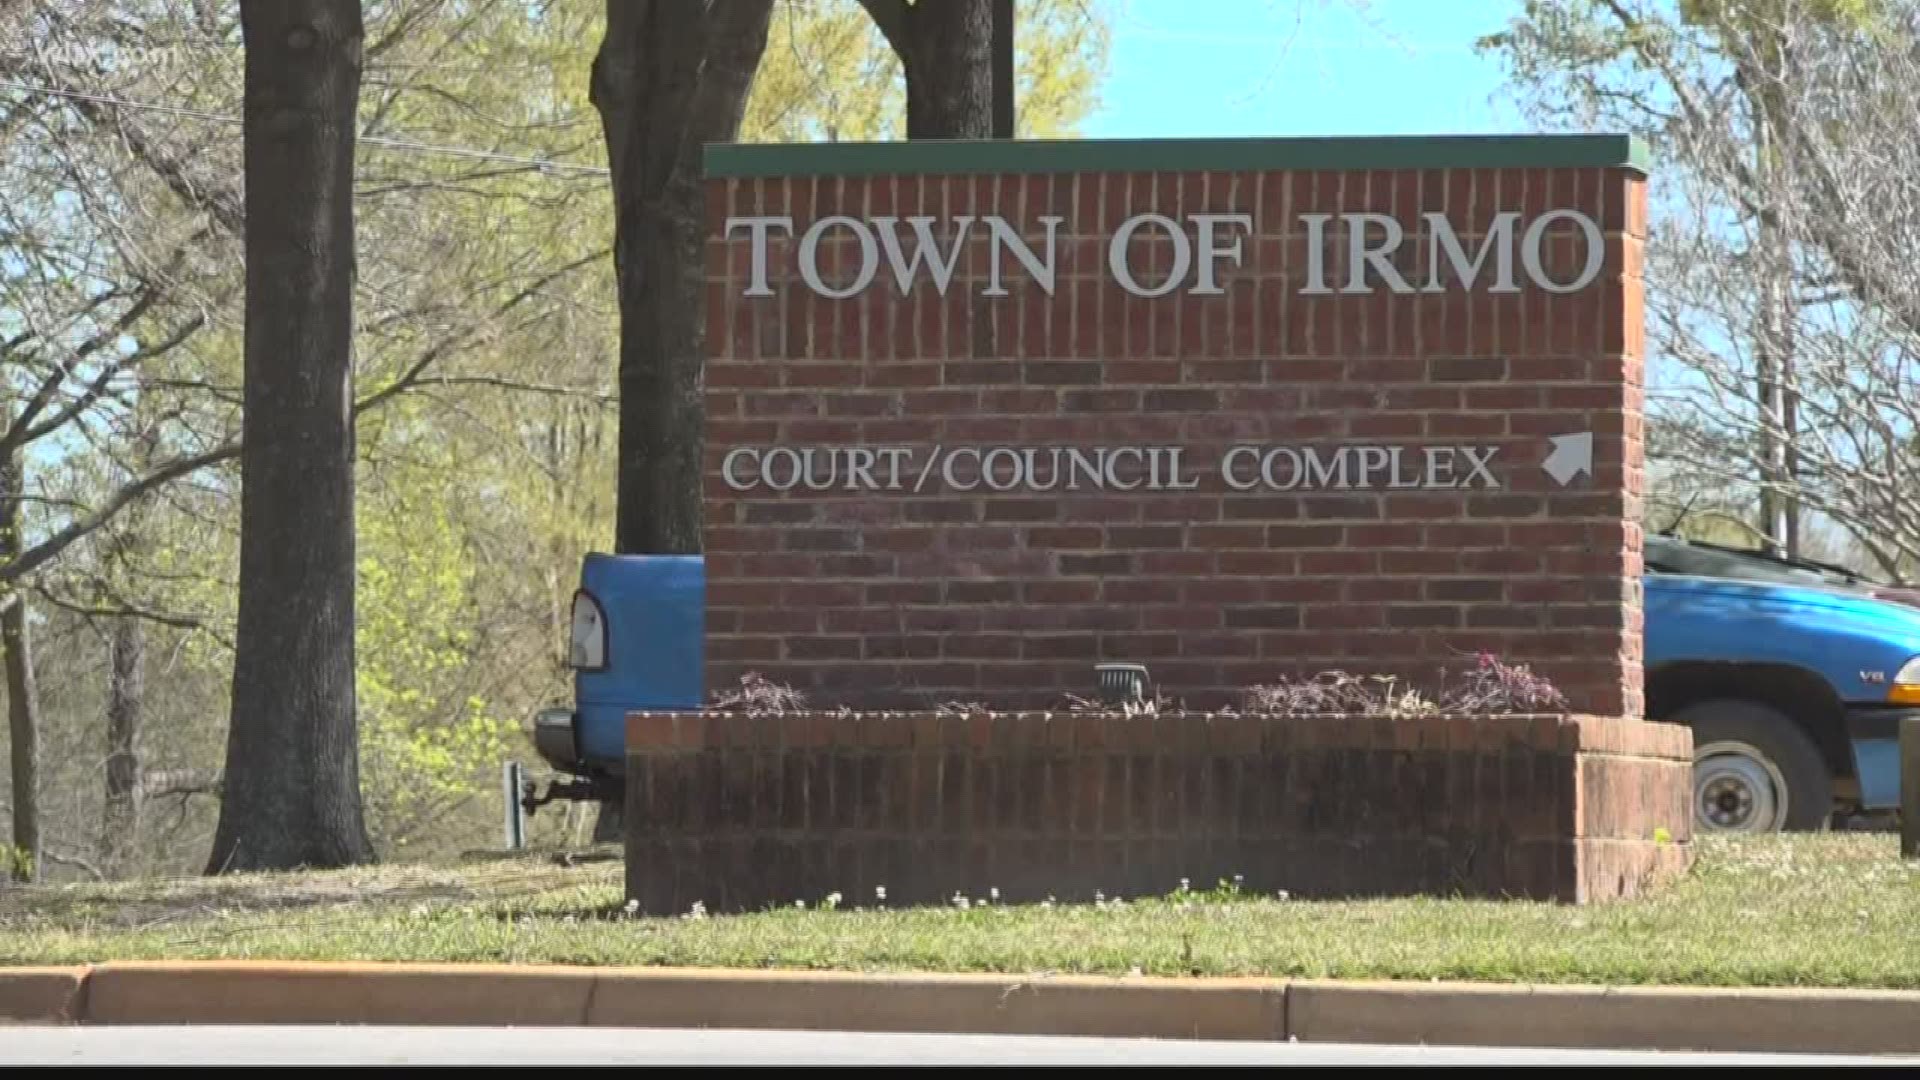 After two proposed housing units were made known, many Irmo residents push for zoning changes in the town.